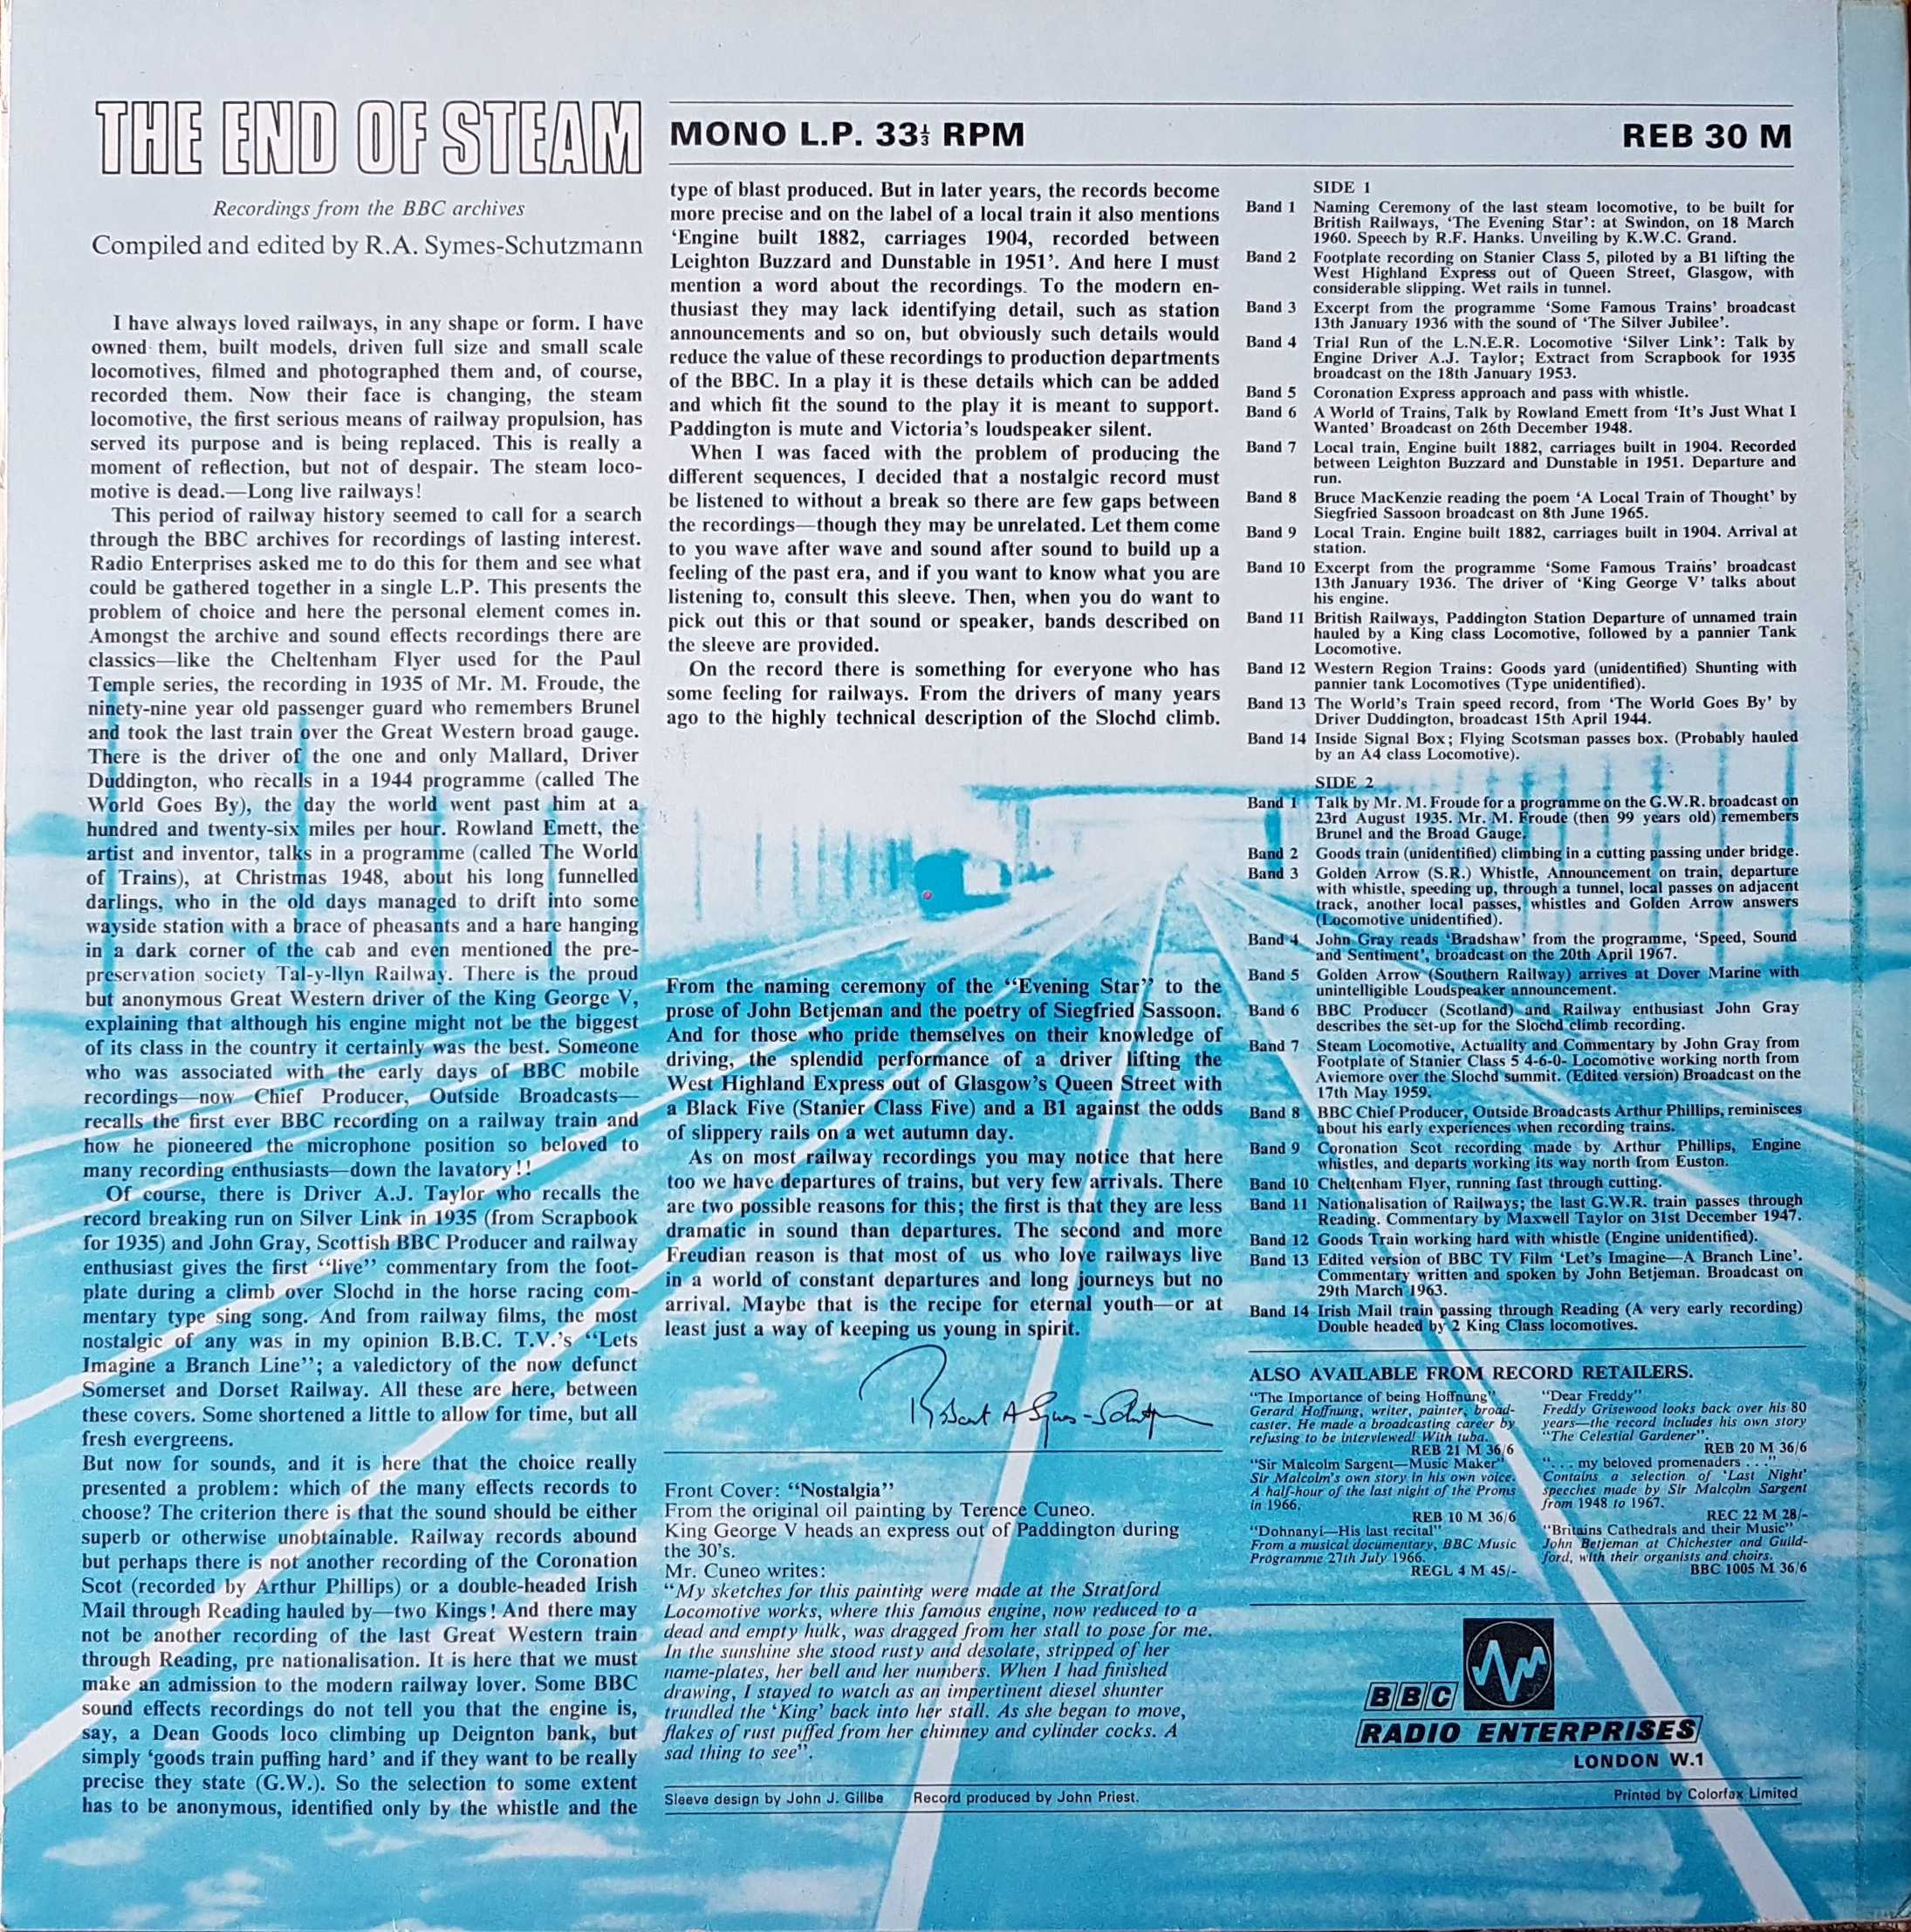 Picture of REB 30 The end of steam by artist Various from the BBC records and Tapes library